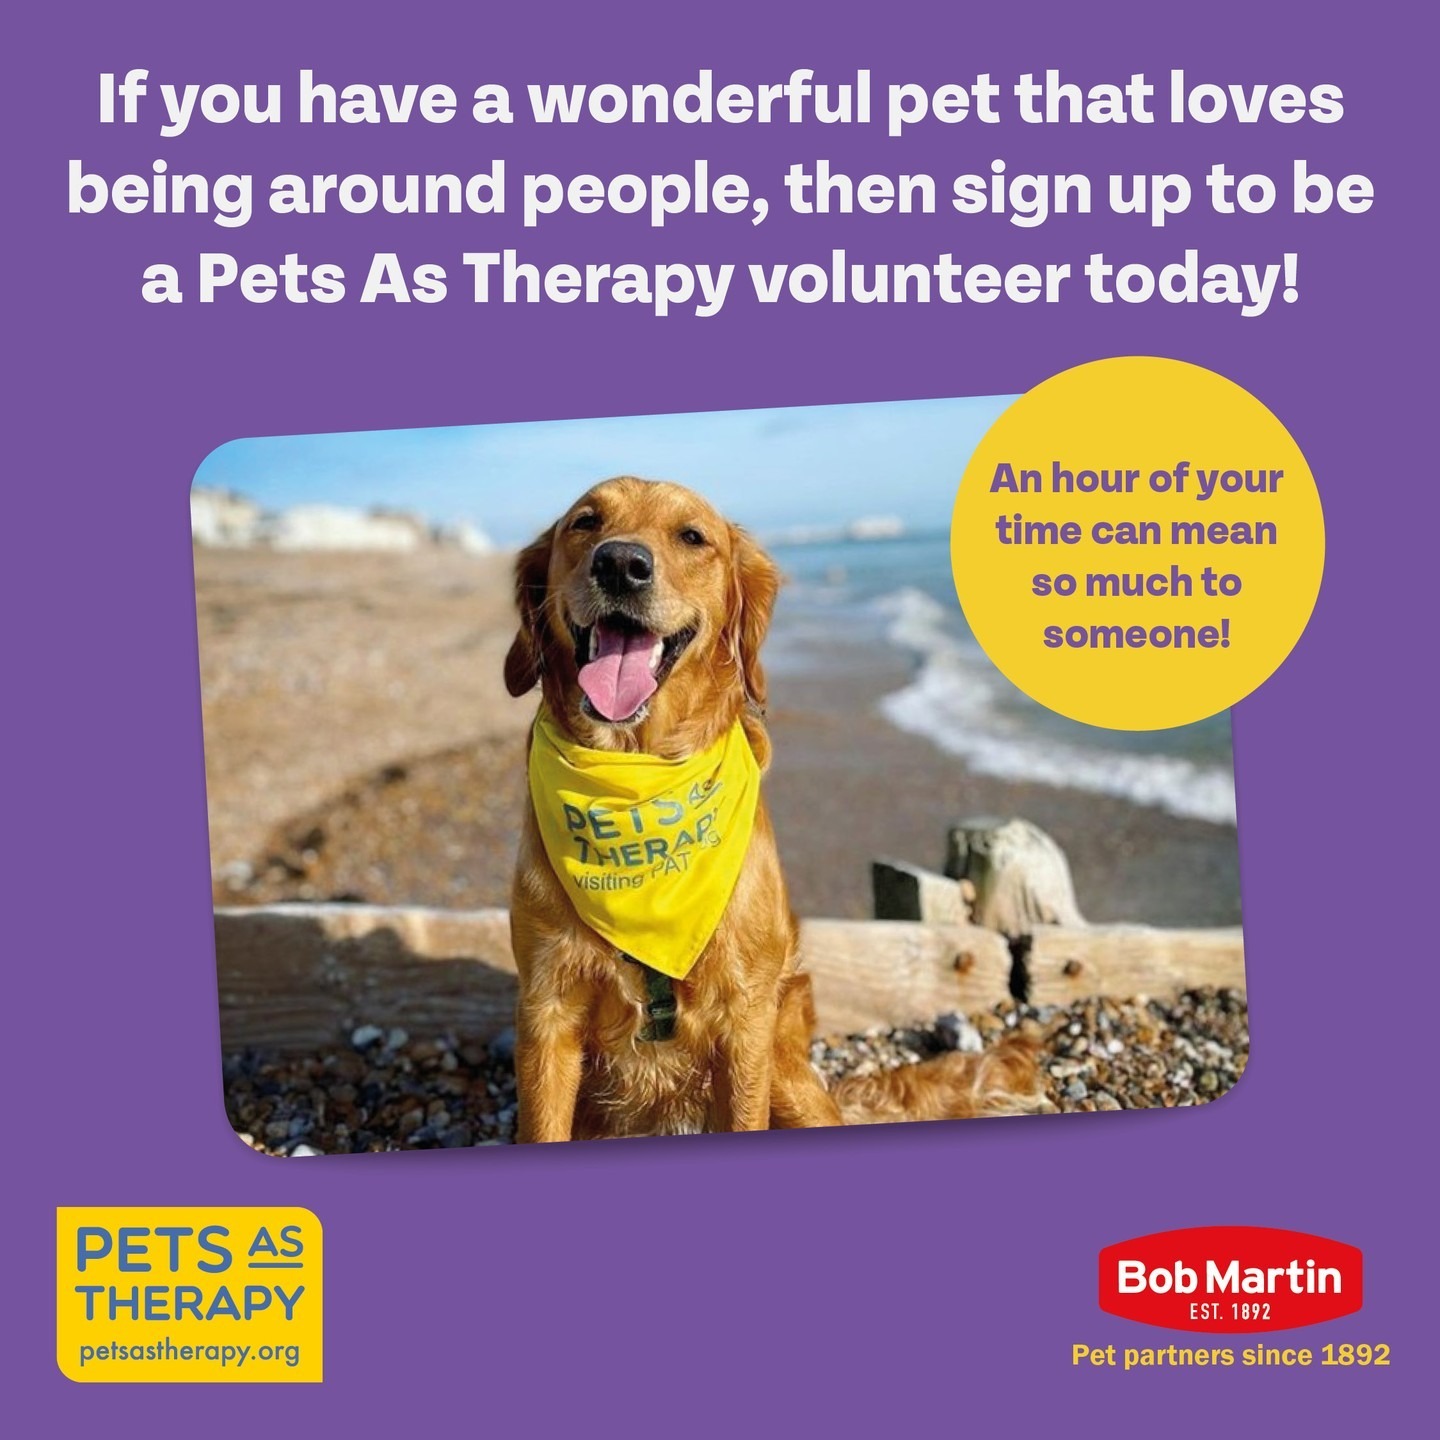 Do you have a pet with a great temperament and would like to share the wonderful benefits of its companionship with others in your community? Sign up to be a Pets As Therapy volunteer via the link in our bio

.
.
.
 #BobMartin #PetHealthcare #Flea #Worm #Dog #Cat #SpotOn #Pets #PetsOfInstagram #PetCare #PetTips #PetHealth #HealthyPets #ActivePets